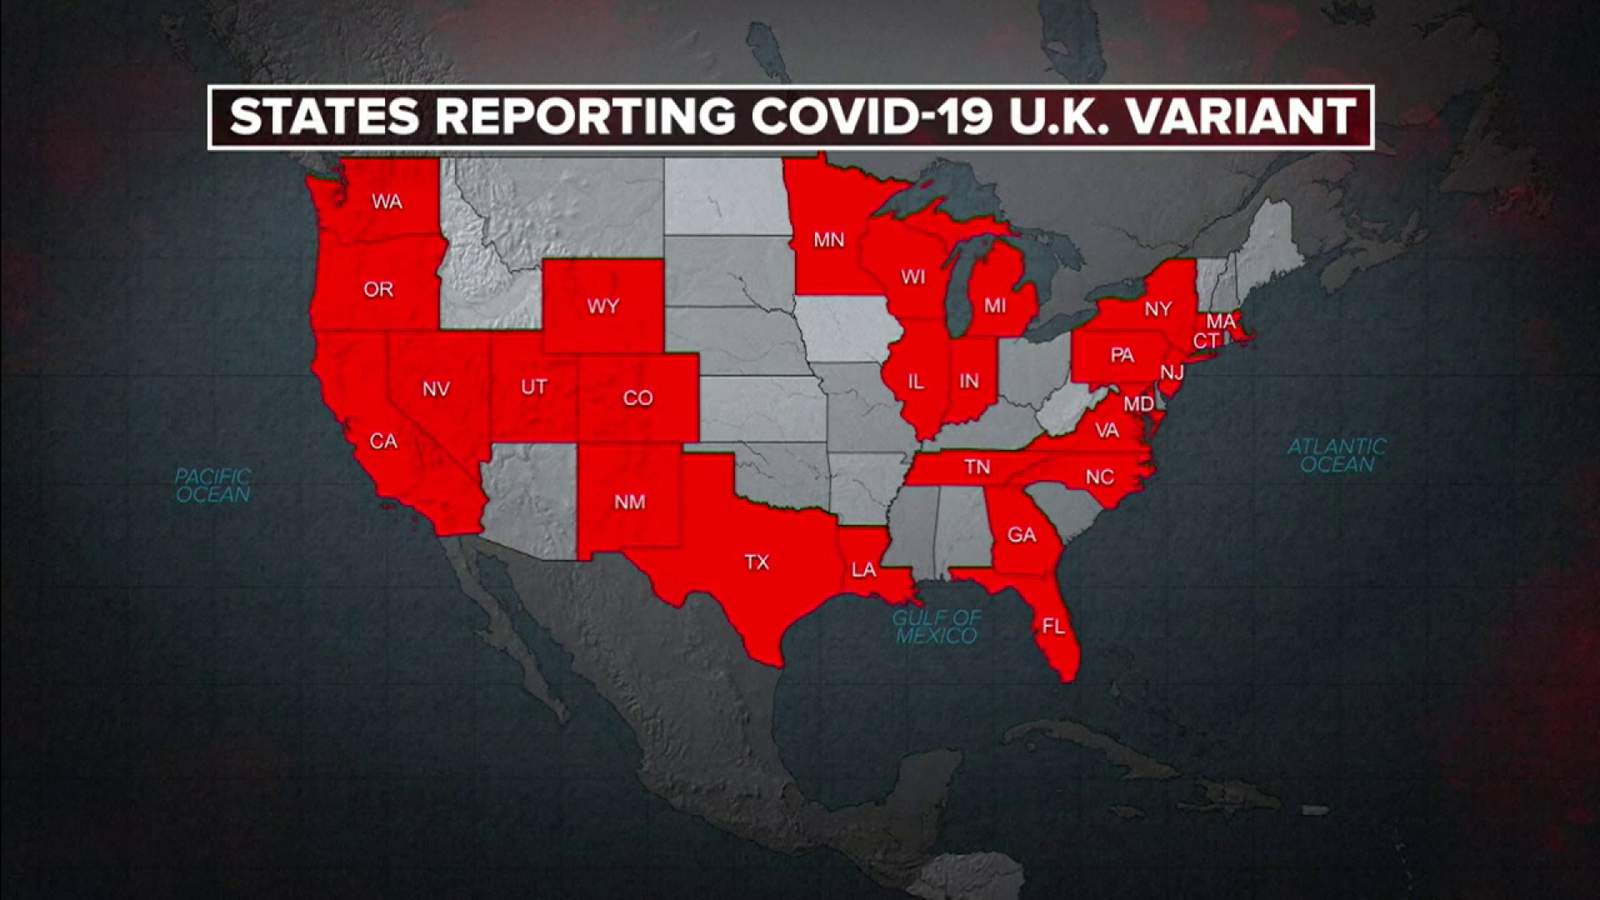 Florida’s COVID-19 variant cases have doubled, says CDC